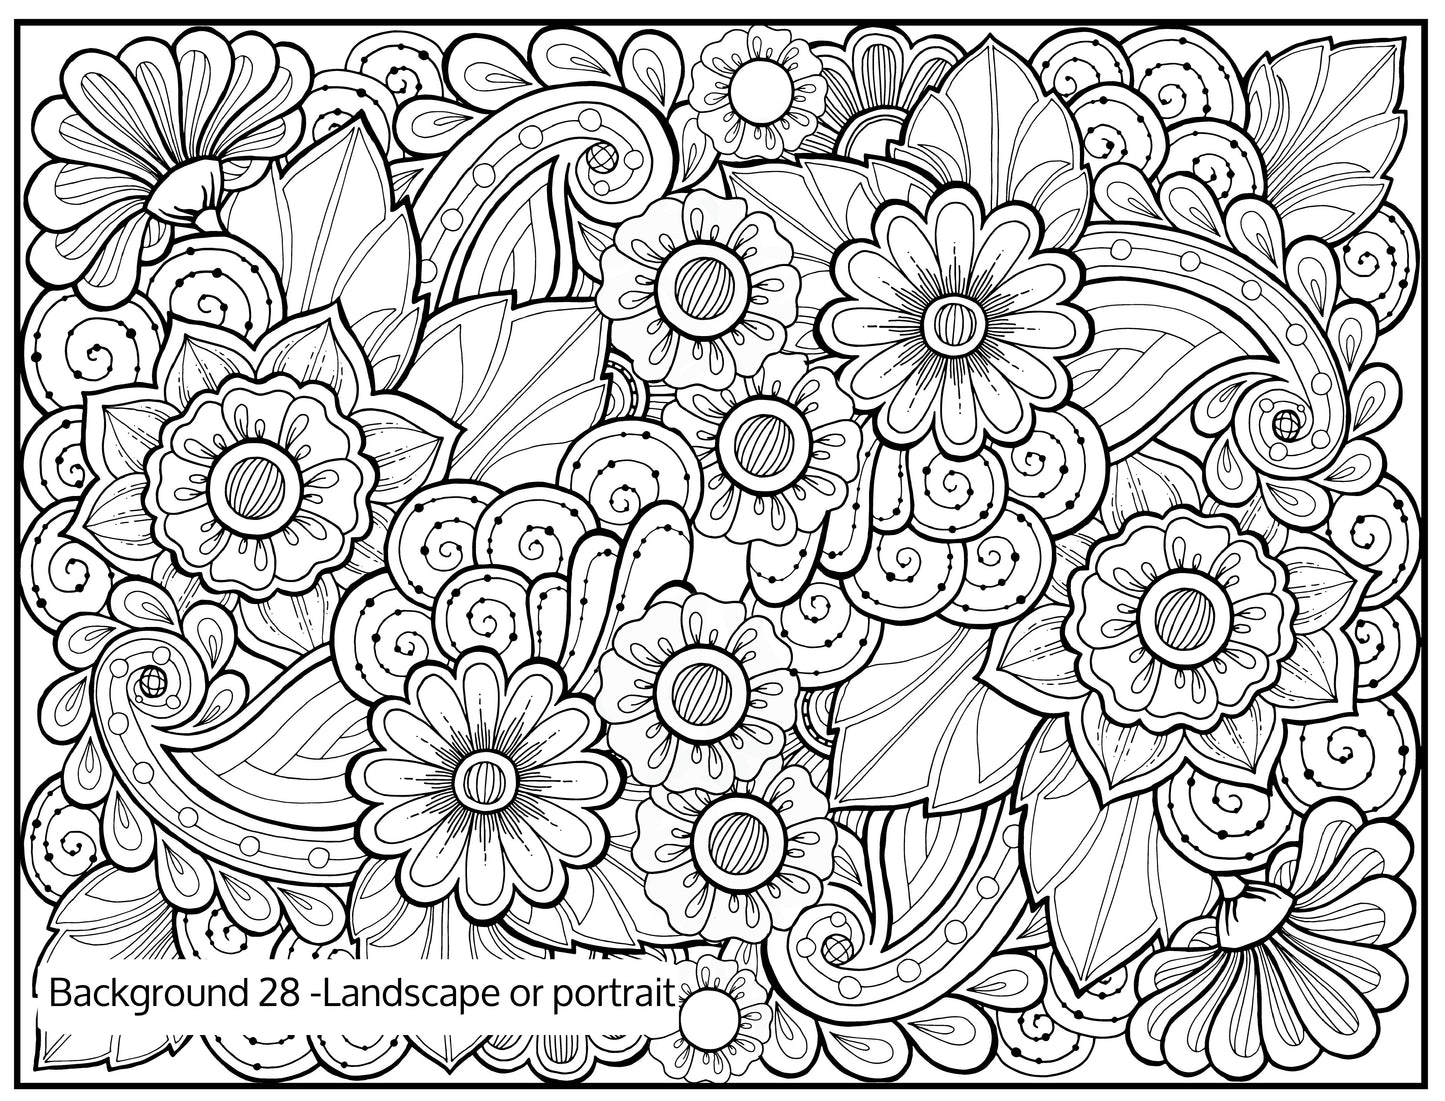 Background 28 Custom Personalized Giant Coloring Poster 46"x60"